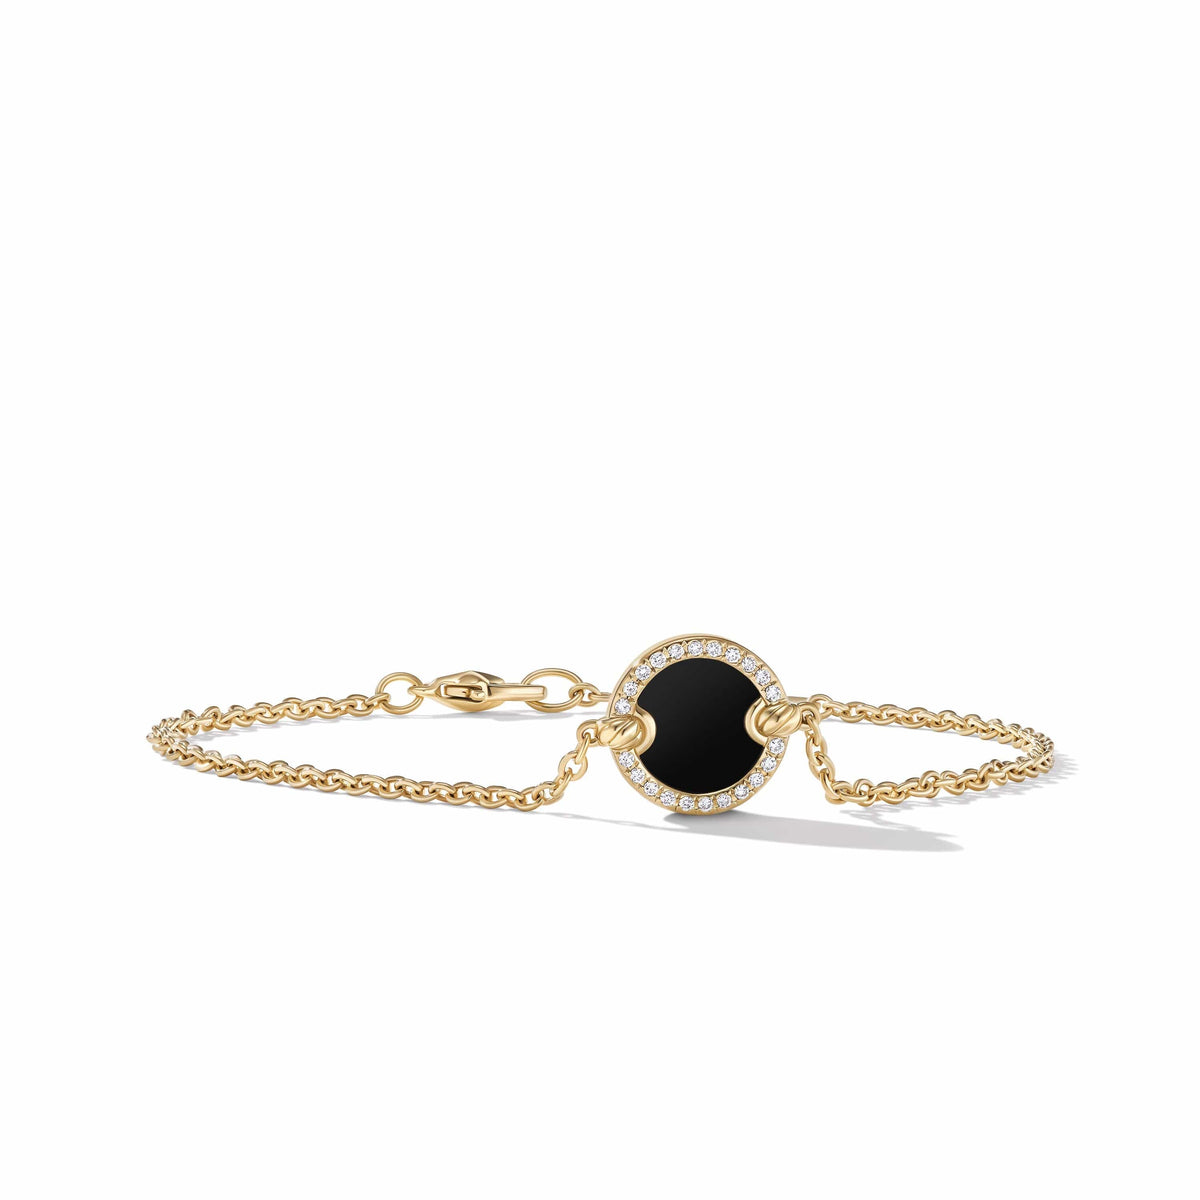 Petite DY Elements® Center Station Chain Bracelet in 18K Yellow Gold with Black Onyx and Pavé Diamonds